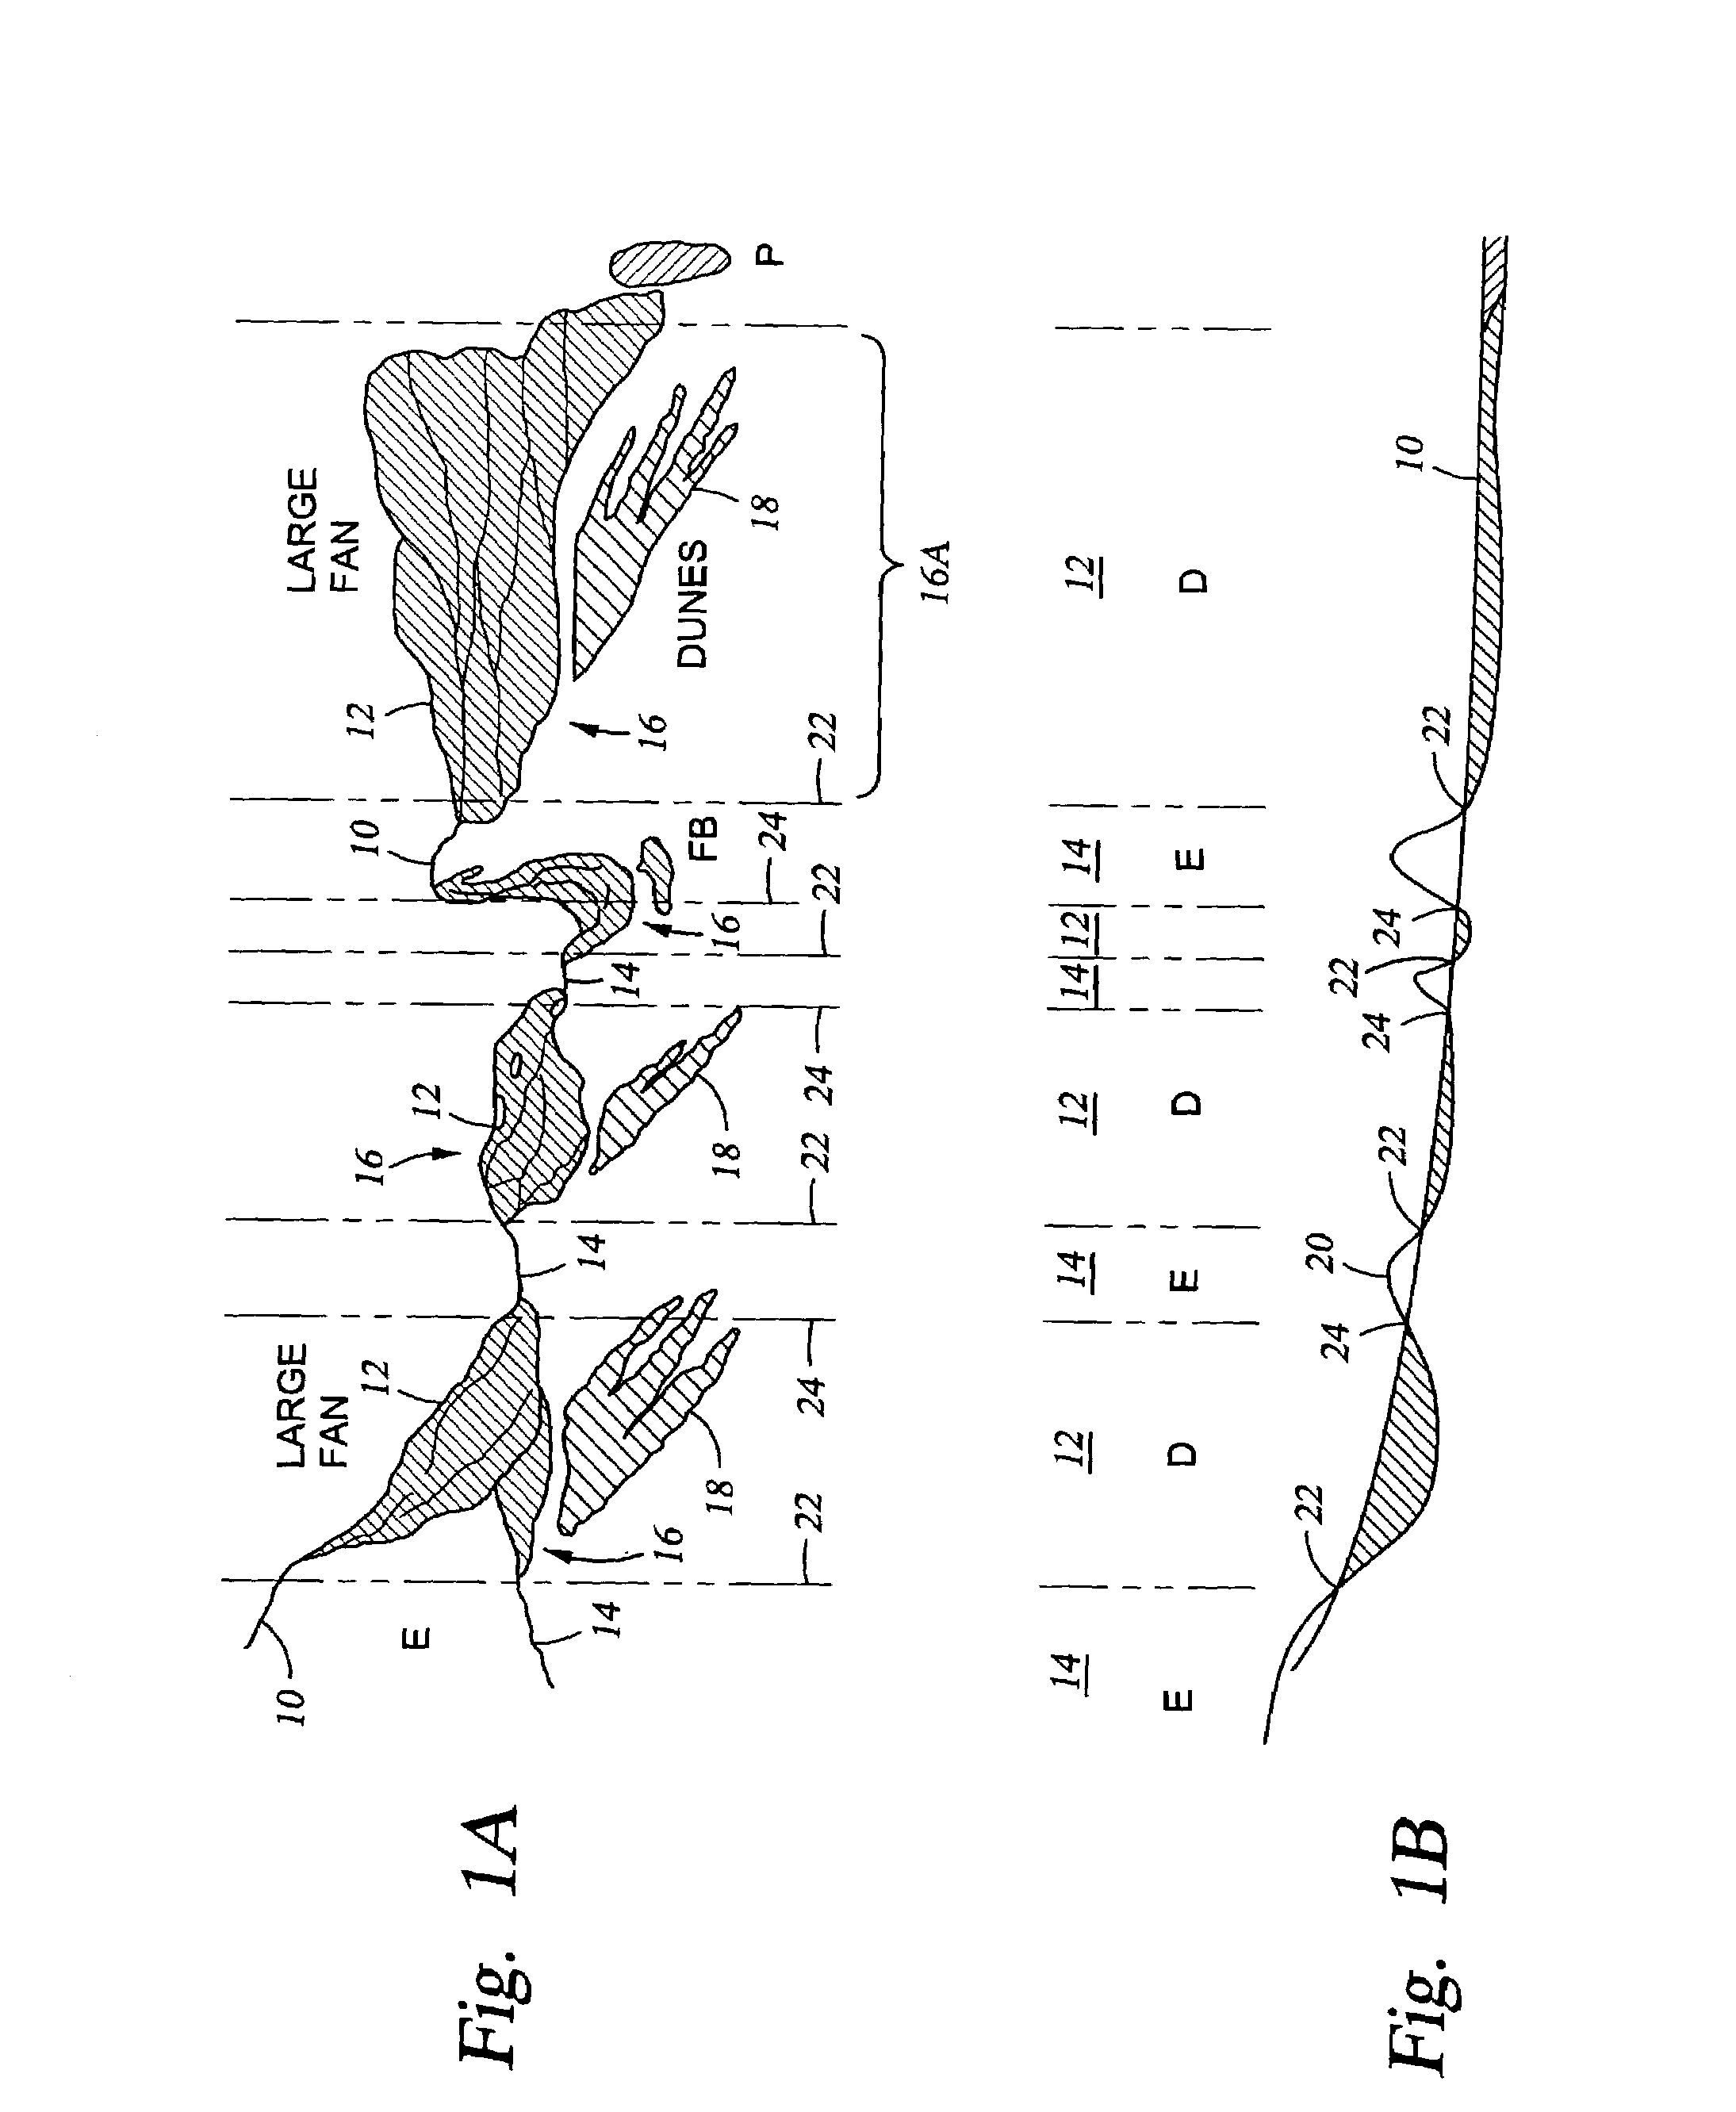 Method for identifying sedimentary bodies from images and its application to mineral exploration